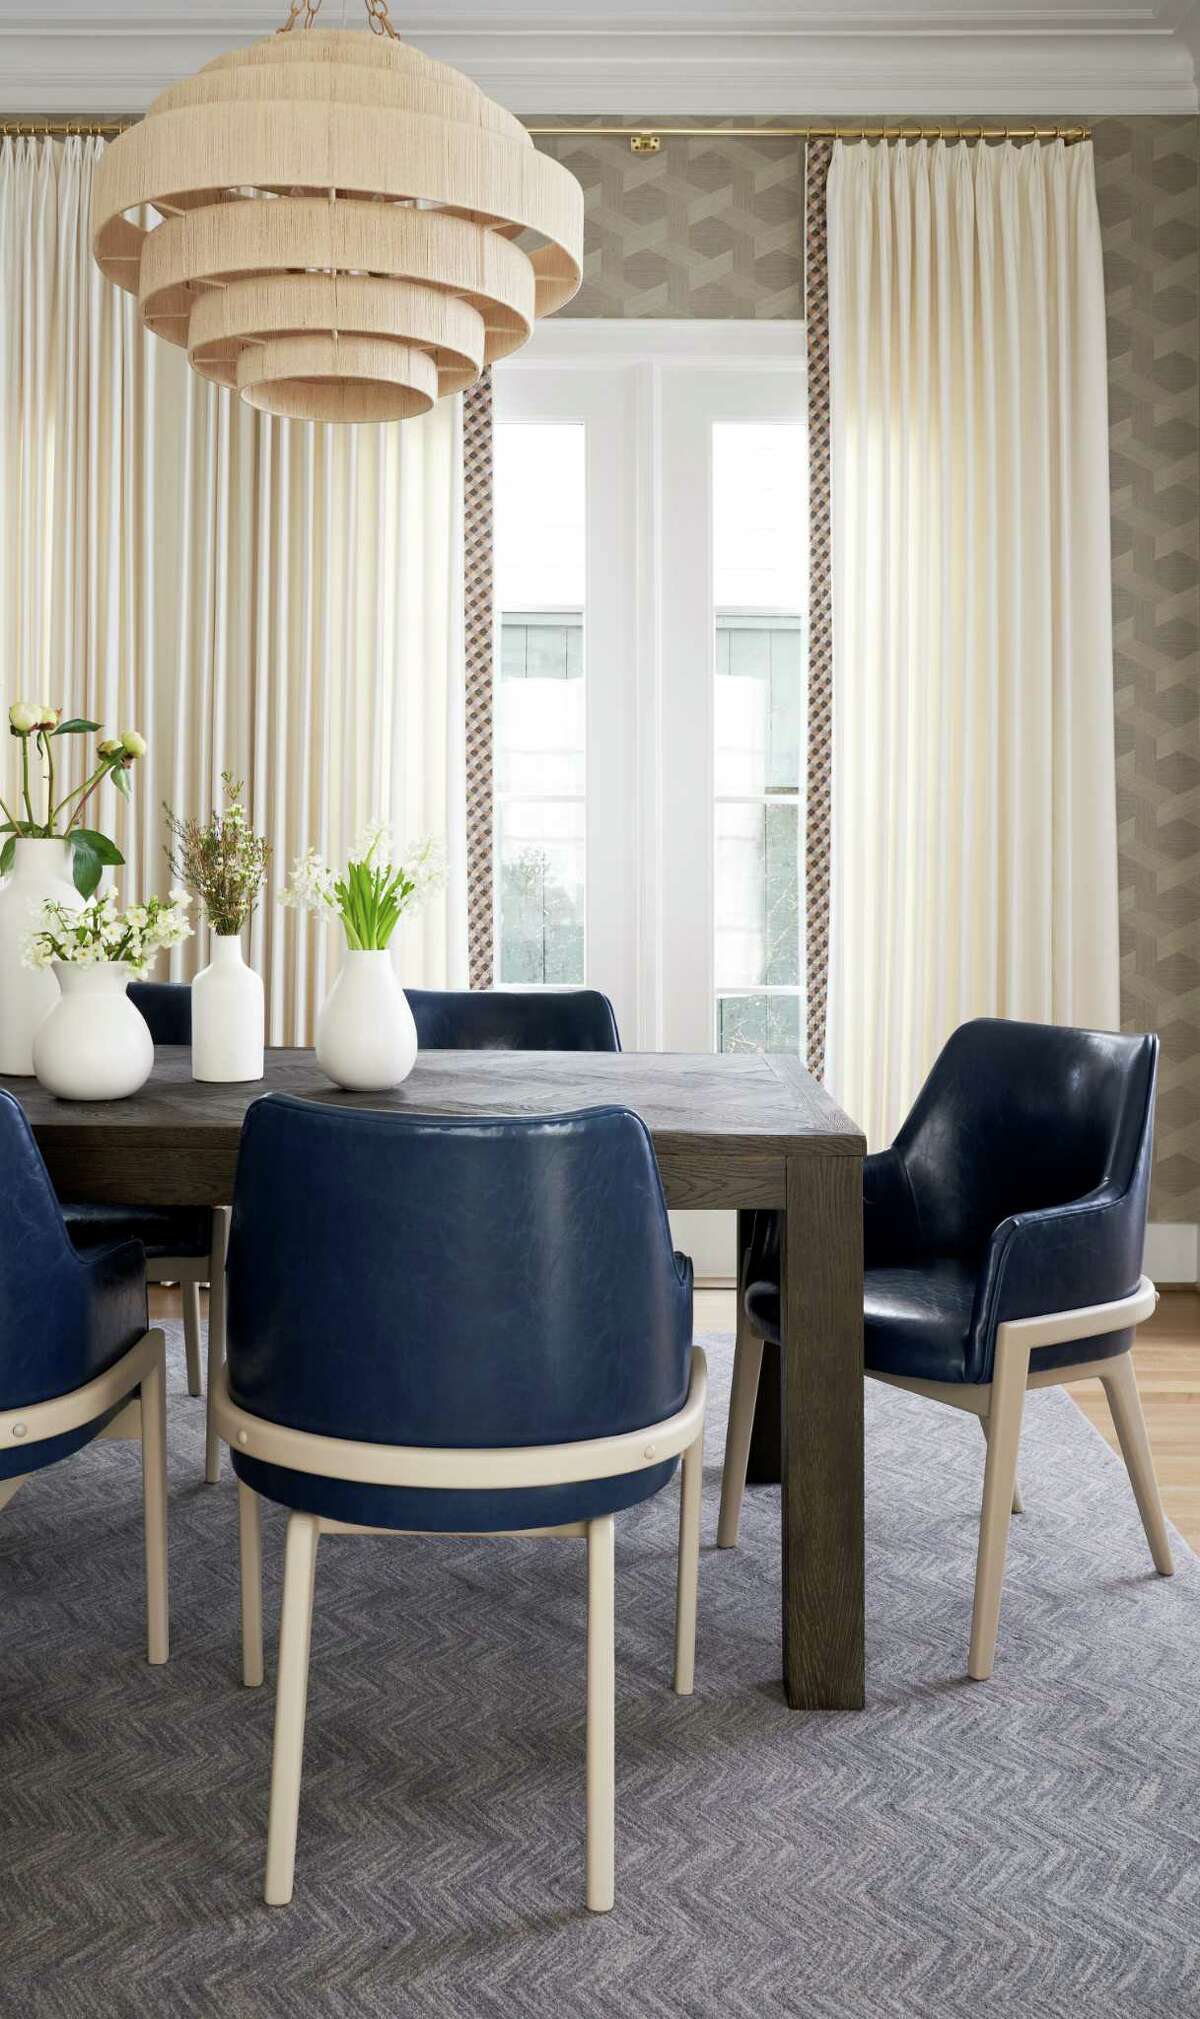 Beautiful Phillip Jeffries vinyl woven sisal wallpaper and chandeliers covered in natural fiber add texture in the dining room.